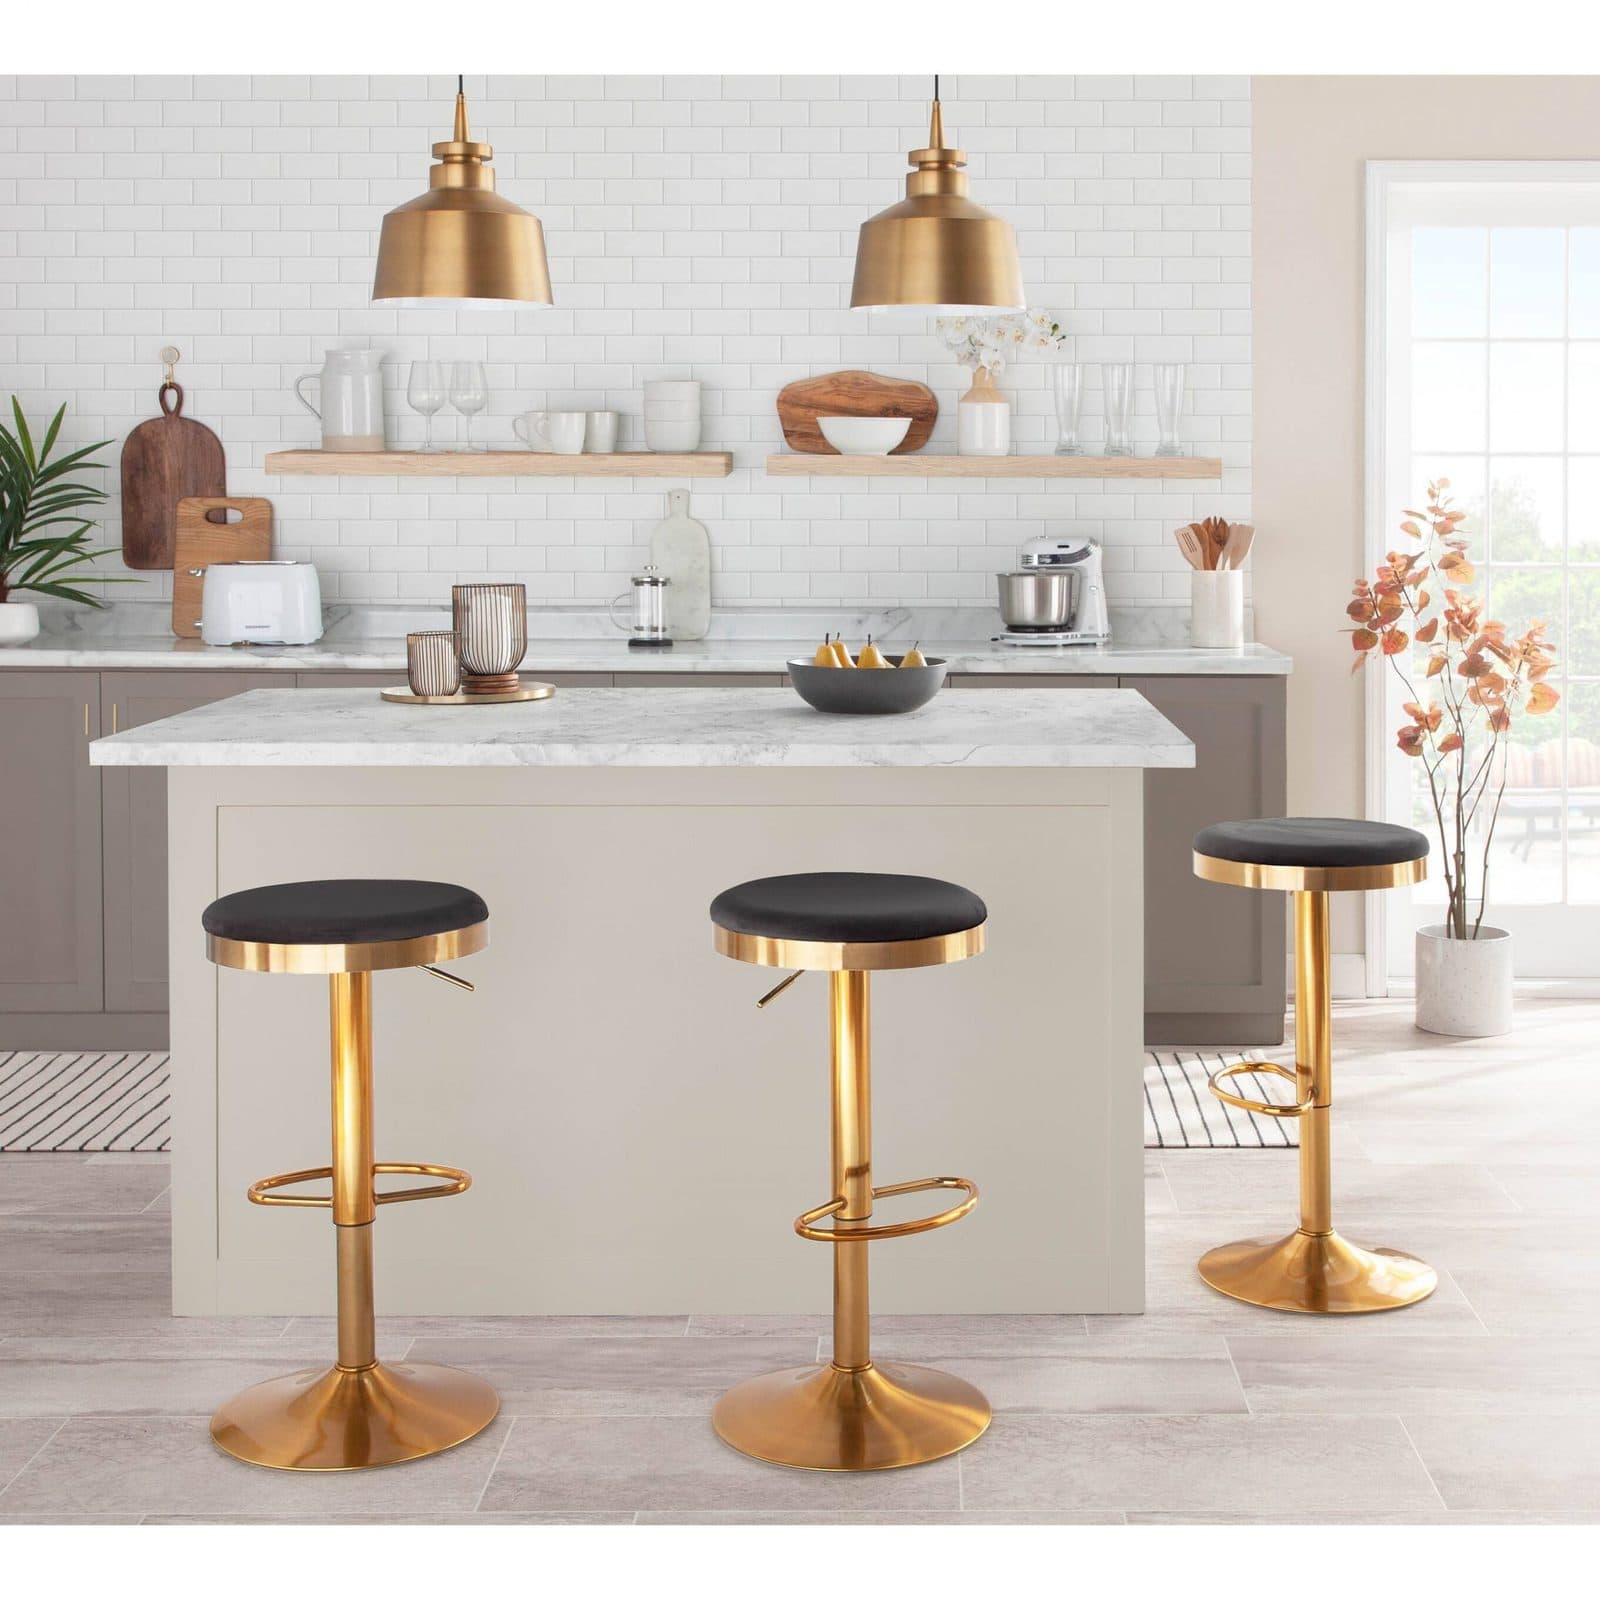 15 Best Stools For Kitchen Island, Best Bar Stool Height For Kitchen Island